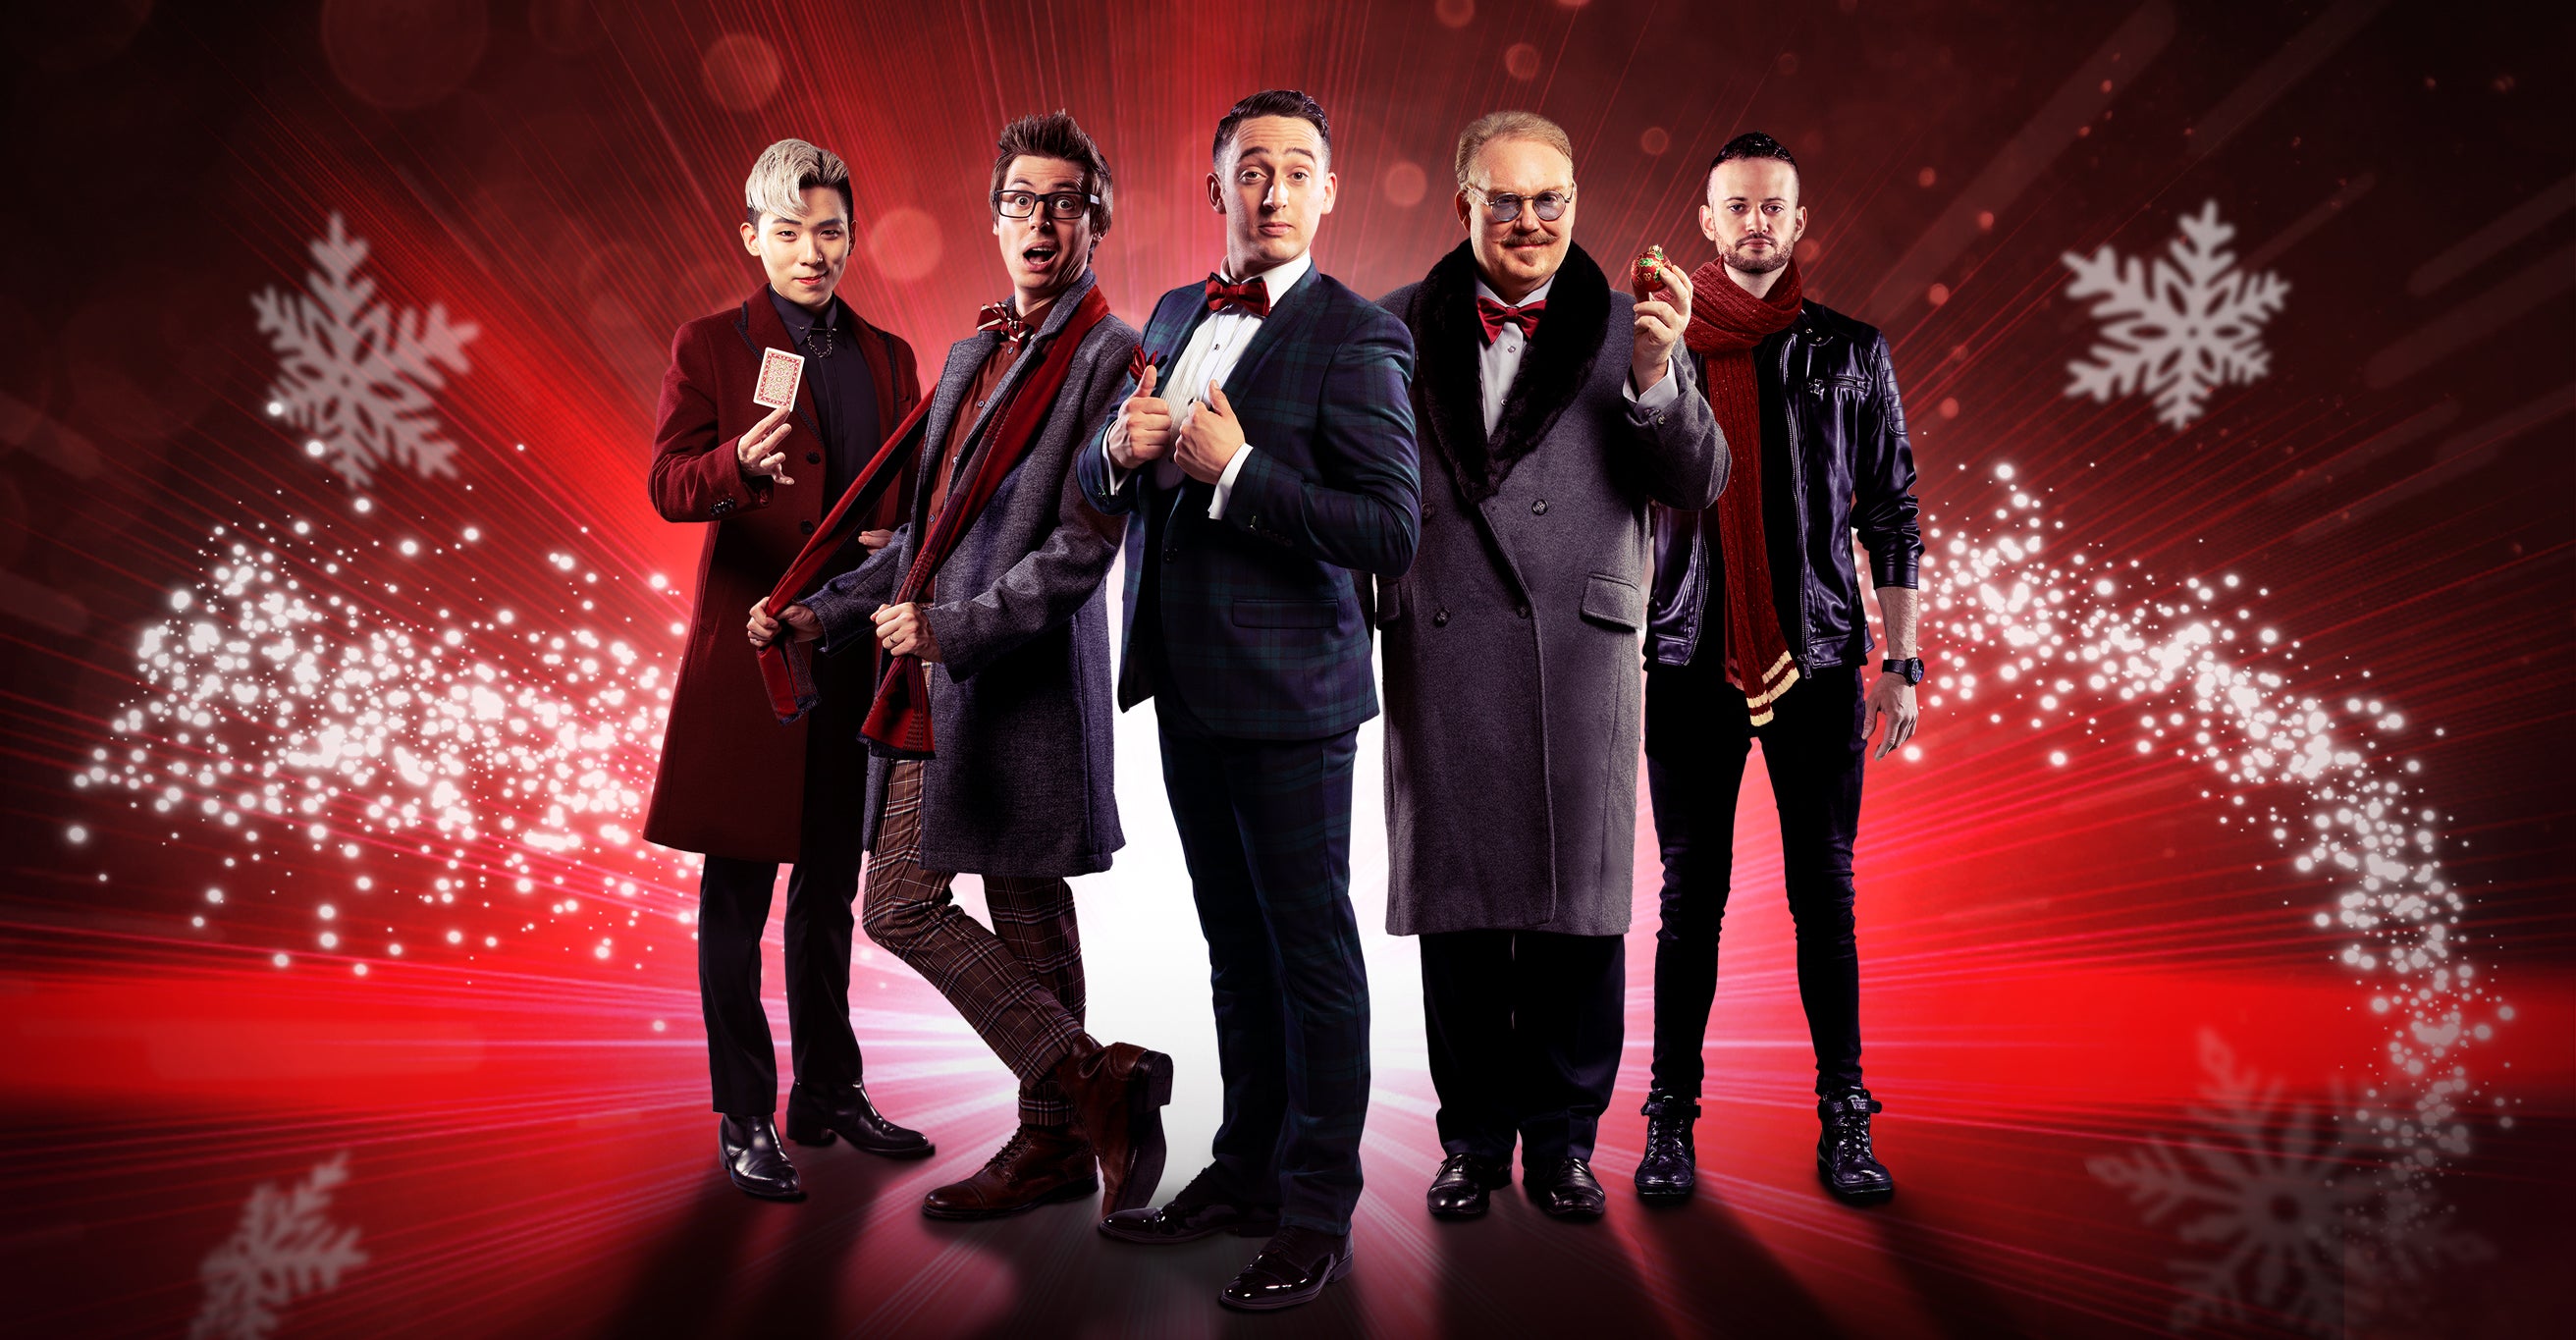 The Illusionists: Magic of the Holidays in Dallas promo photo for Official Platinum Onsale presale offer code